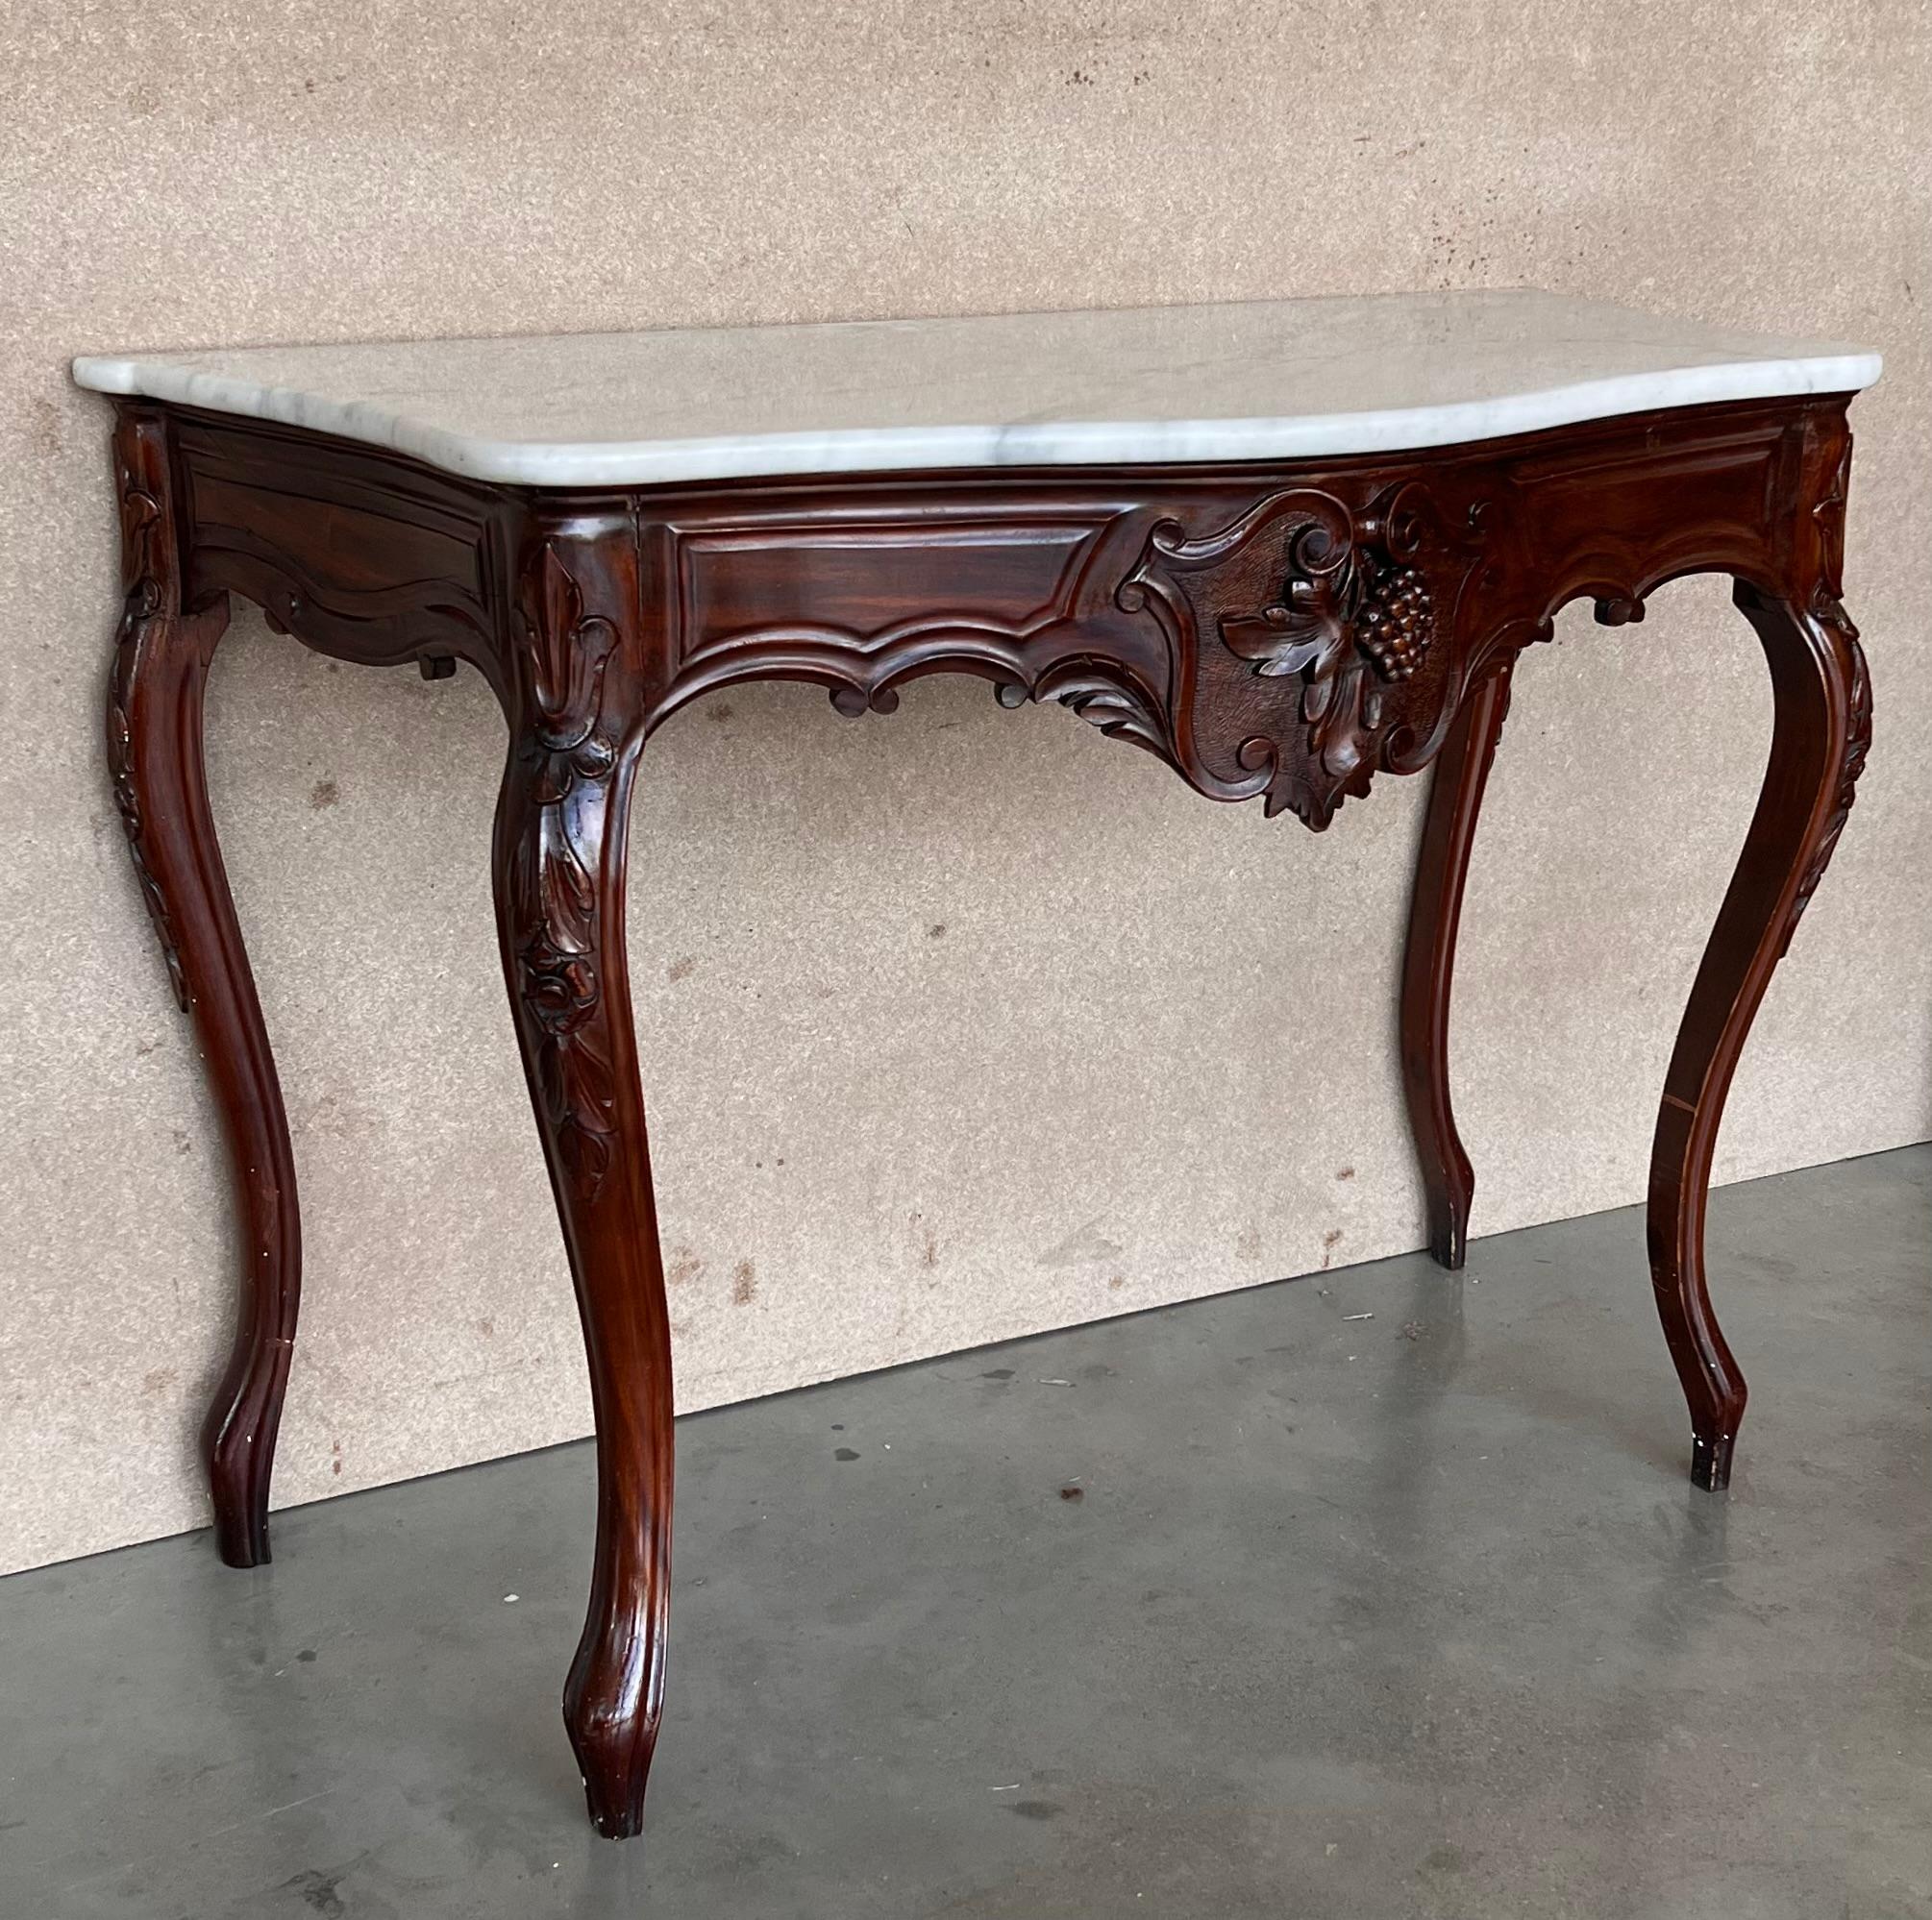 20th Century French Regency Carved Walnut Console Table with White Marble Top For Sale